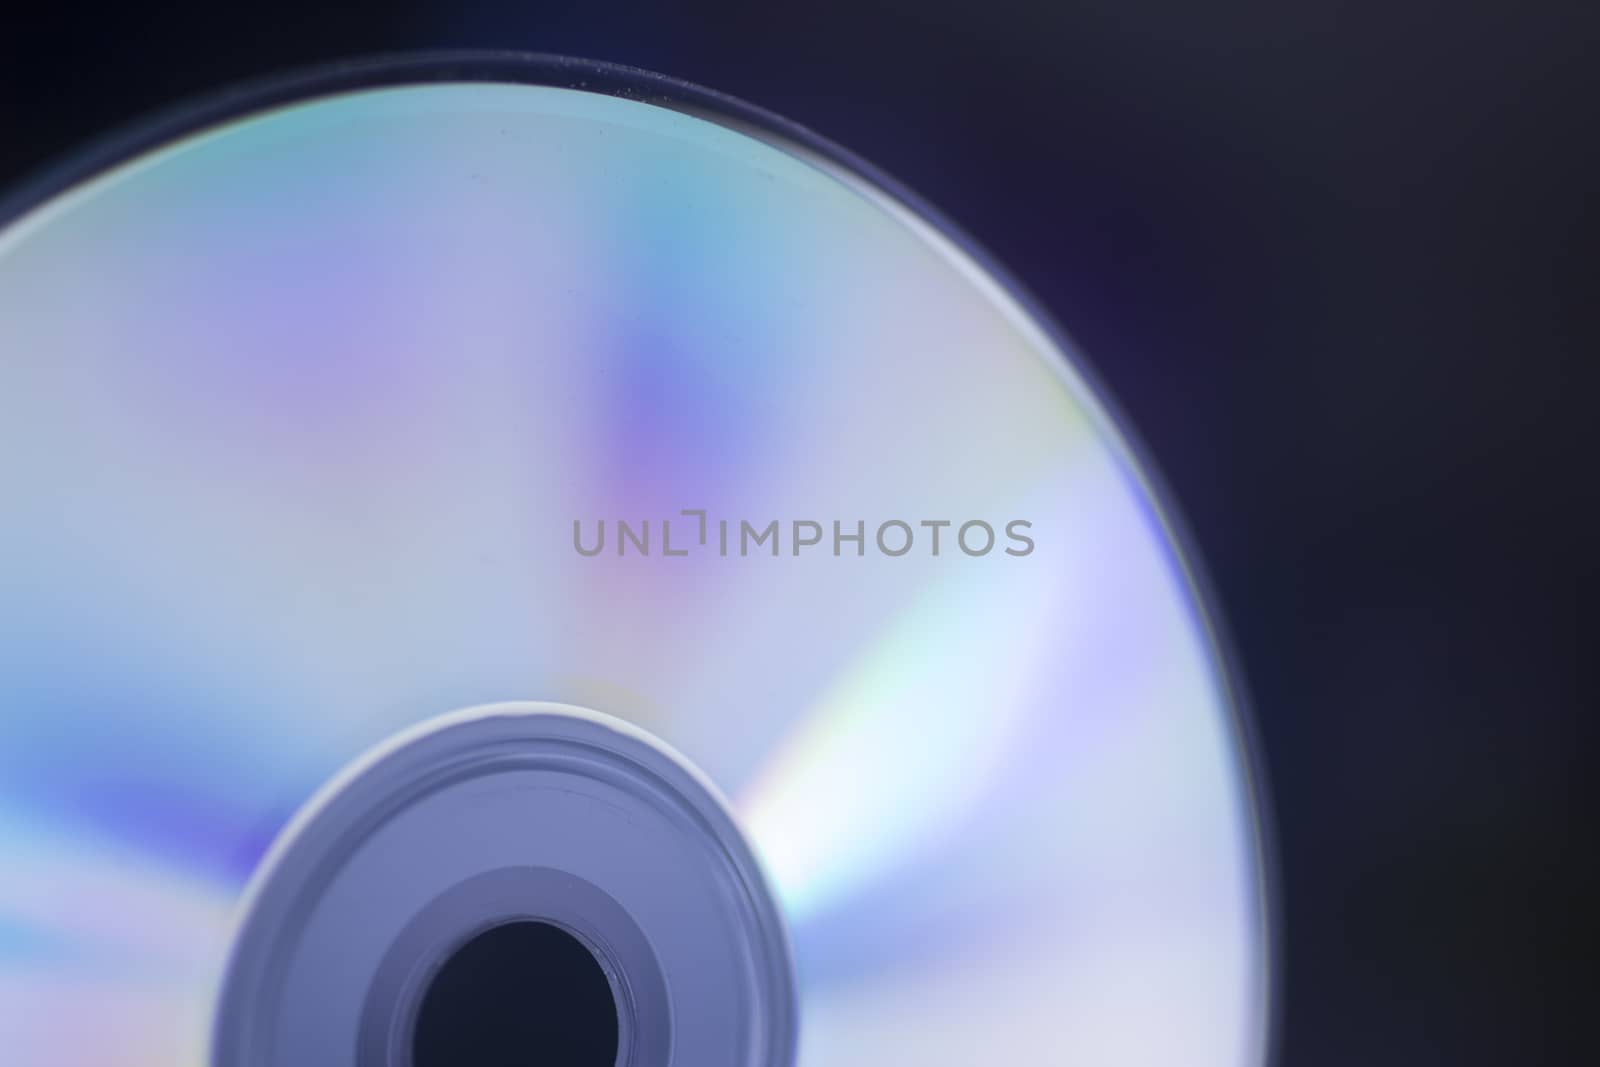 Close-up semi-abstract macro photo of shiny underside of cd dvd cd-rom disk reflecting multicolors in blue purple tone set against black studio background. Artistic color digital photo with shallow depth of focus.